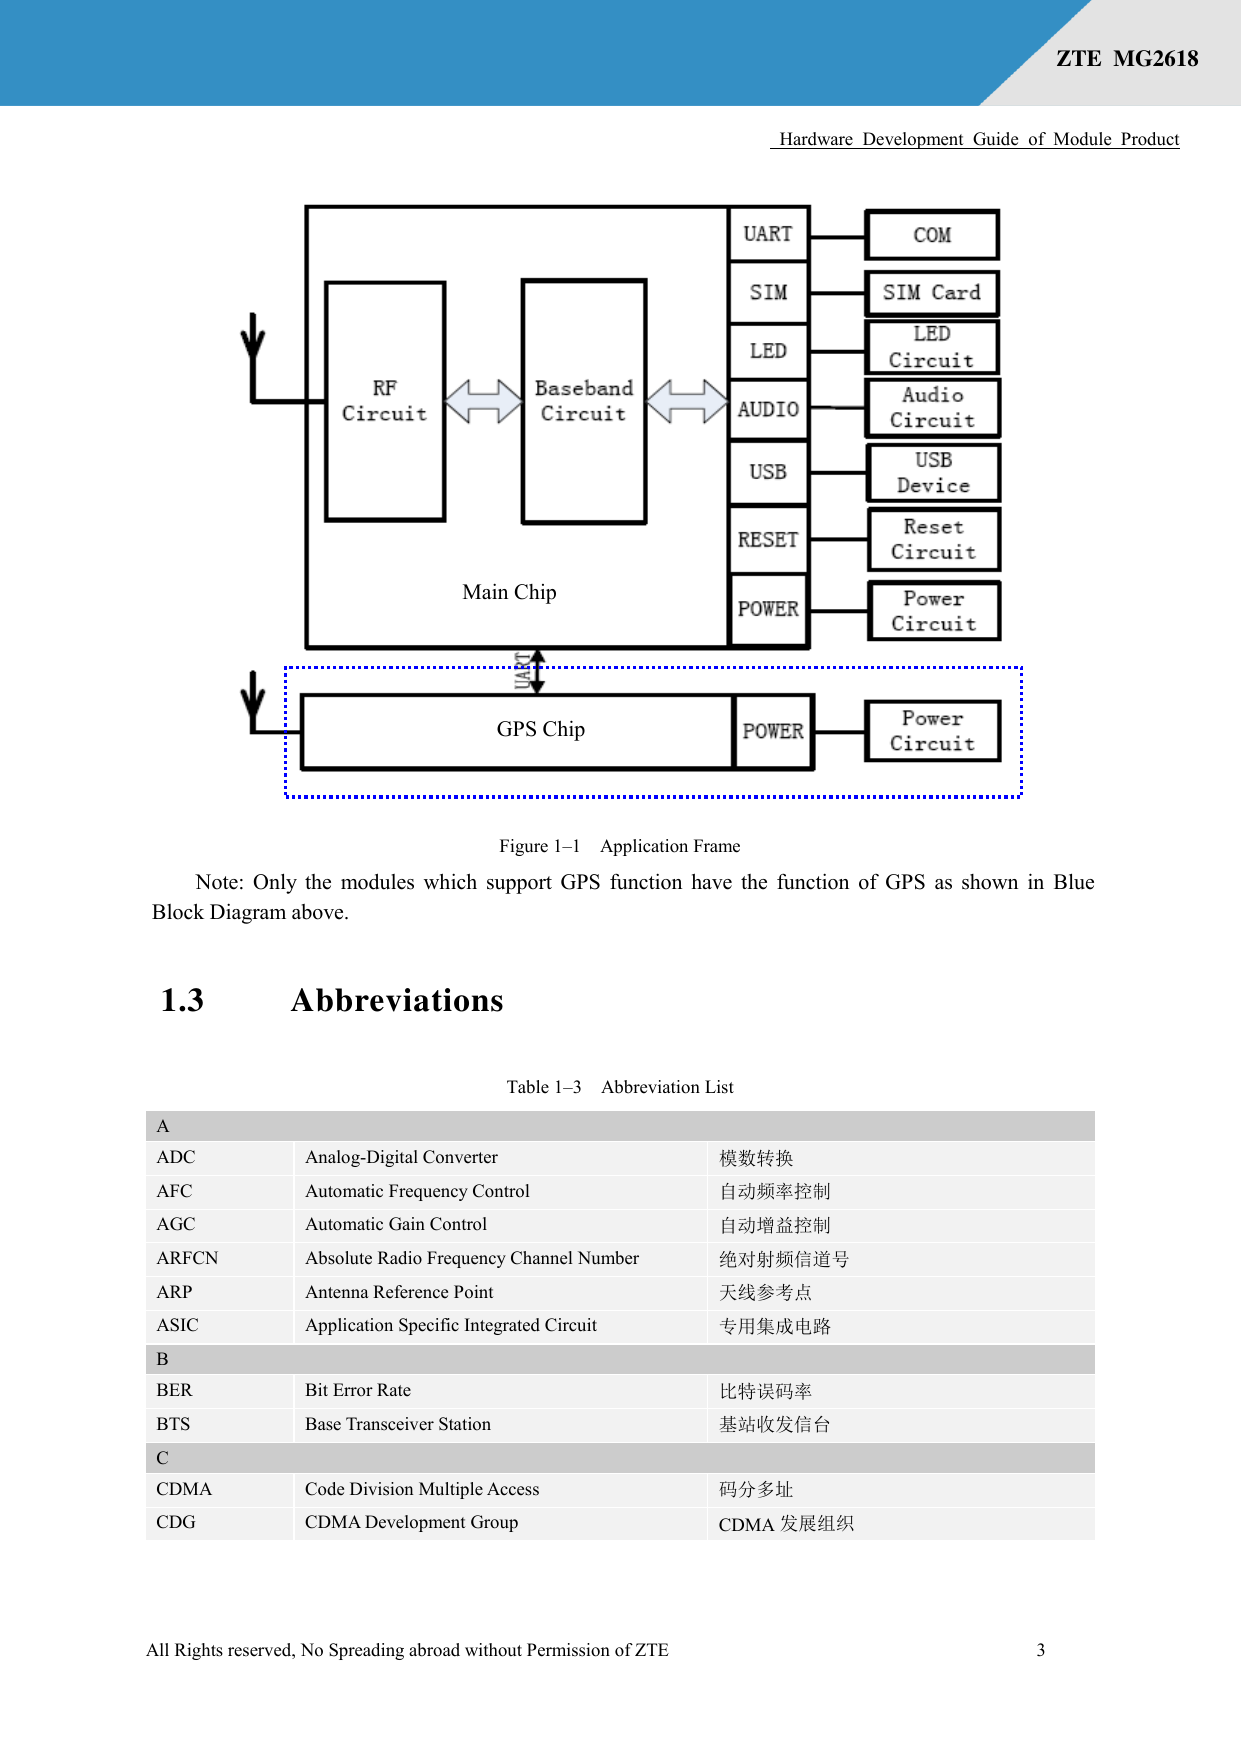      Hardware  Development  Guide  of  Module  Product  All Rights reserved, No Spreading abroad without Permission of ZTE              3 ZTE  MG2618    Figure 1–1  Application Frame Note: Only the modules which support GPS function have the function of GPS as shown in Blue Block Diagram above. 1.3 Abbreviations Table 1–3  Abbreviation List A ADC Analog-Digital Converter 模数转换 AFC Automatic Frequency Control 自动频率控制 AGC Automatic Gain Control 自动增益控制 ARFCN Absolute Radio Frequency Channel Number 绝对射频信道号 ARP Antenna Reference Point 天线参考点 ASIC Application Specific Integrated Circuit 专用集成电路 B BER Bit Error Rate 比特误码率 BTS Base Transceiver Station 基站收发信台 C CDMA Code Division Multiple Access 码分多址 CDG CDMA Development Group CDMA 发展组织 Main Chip GPS Chip 